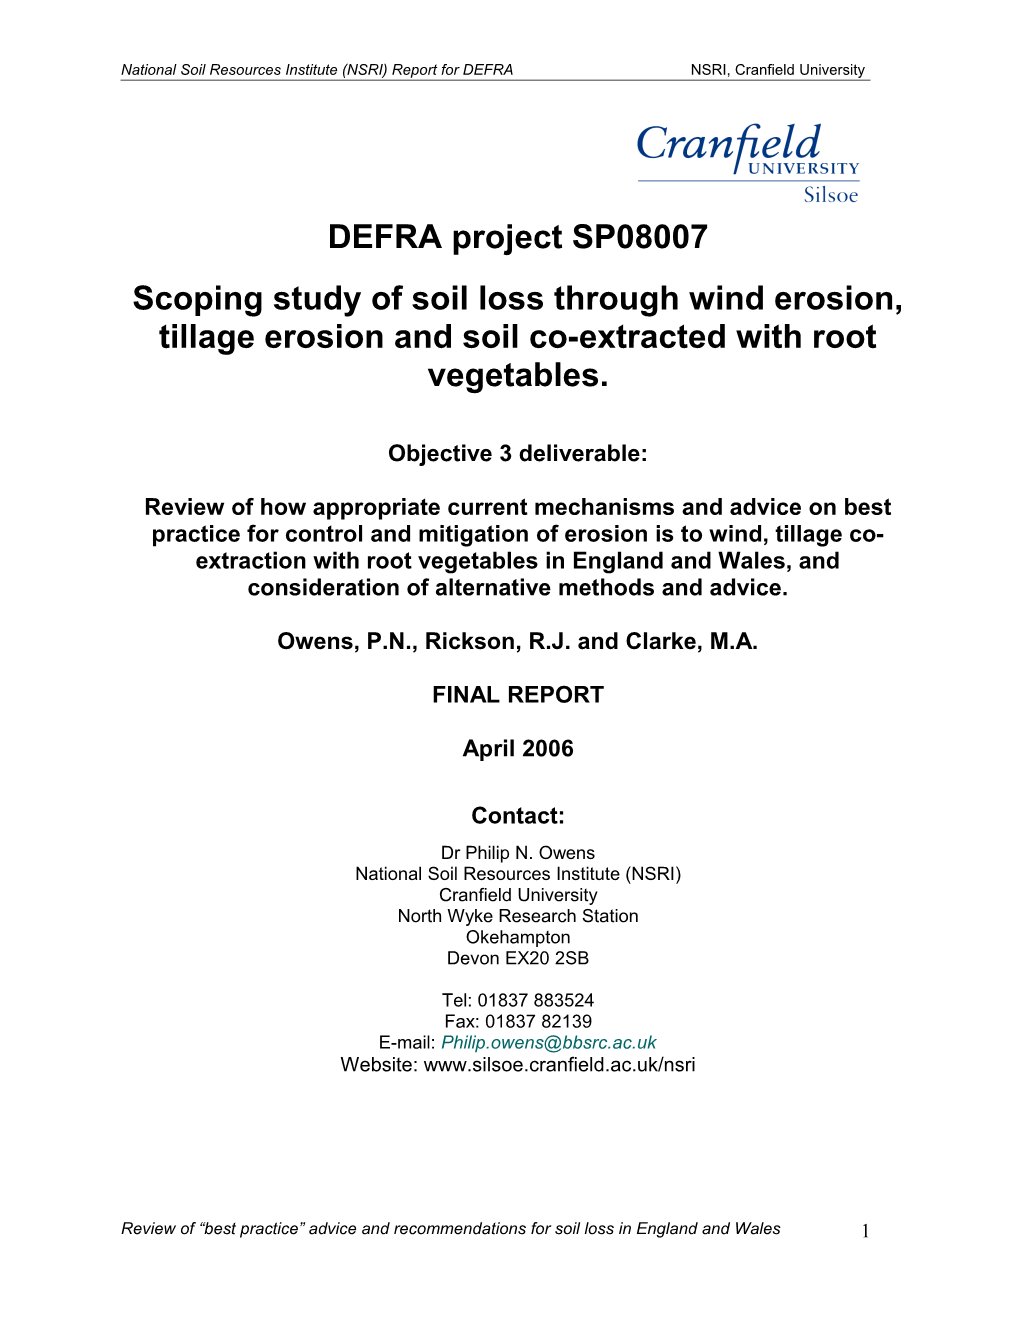 Scoping Study of Soil Loss Through Wind Erosion, Tillage Erosion and Soil Co-Extracted